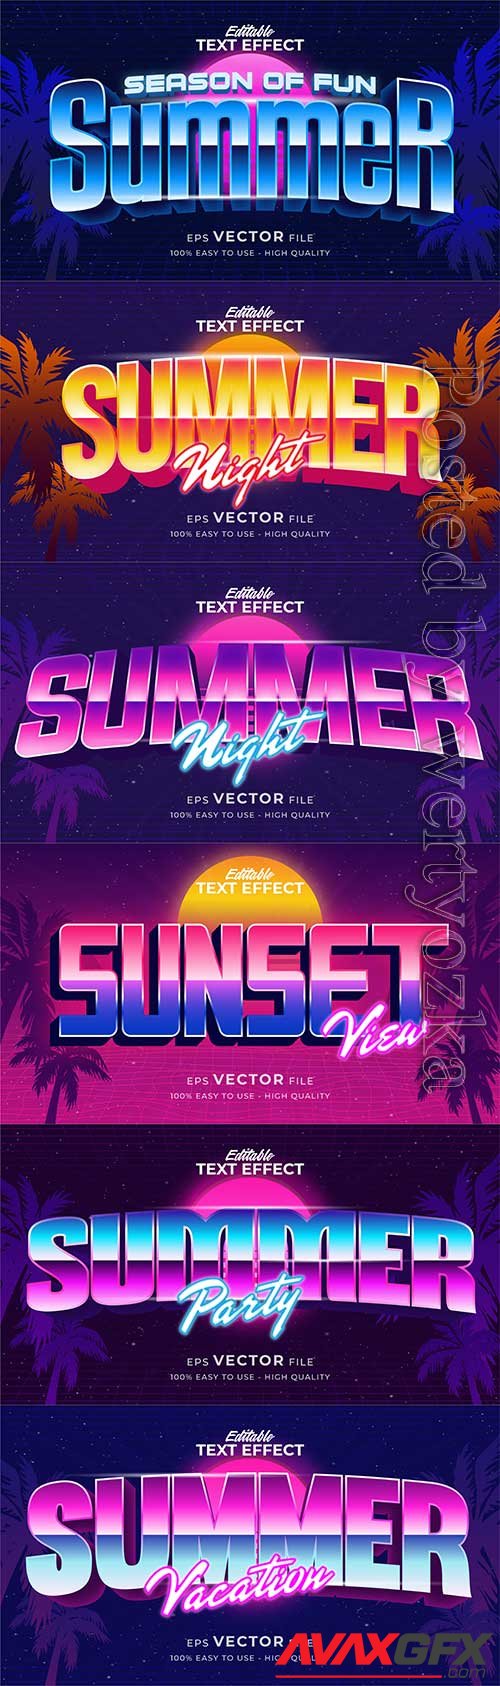 Retro summer holiday text in grunge style theme in vector vol 11